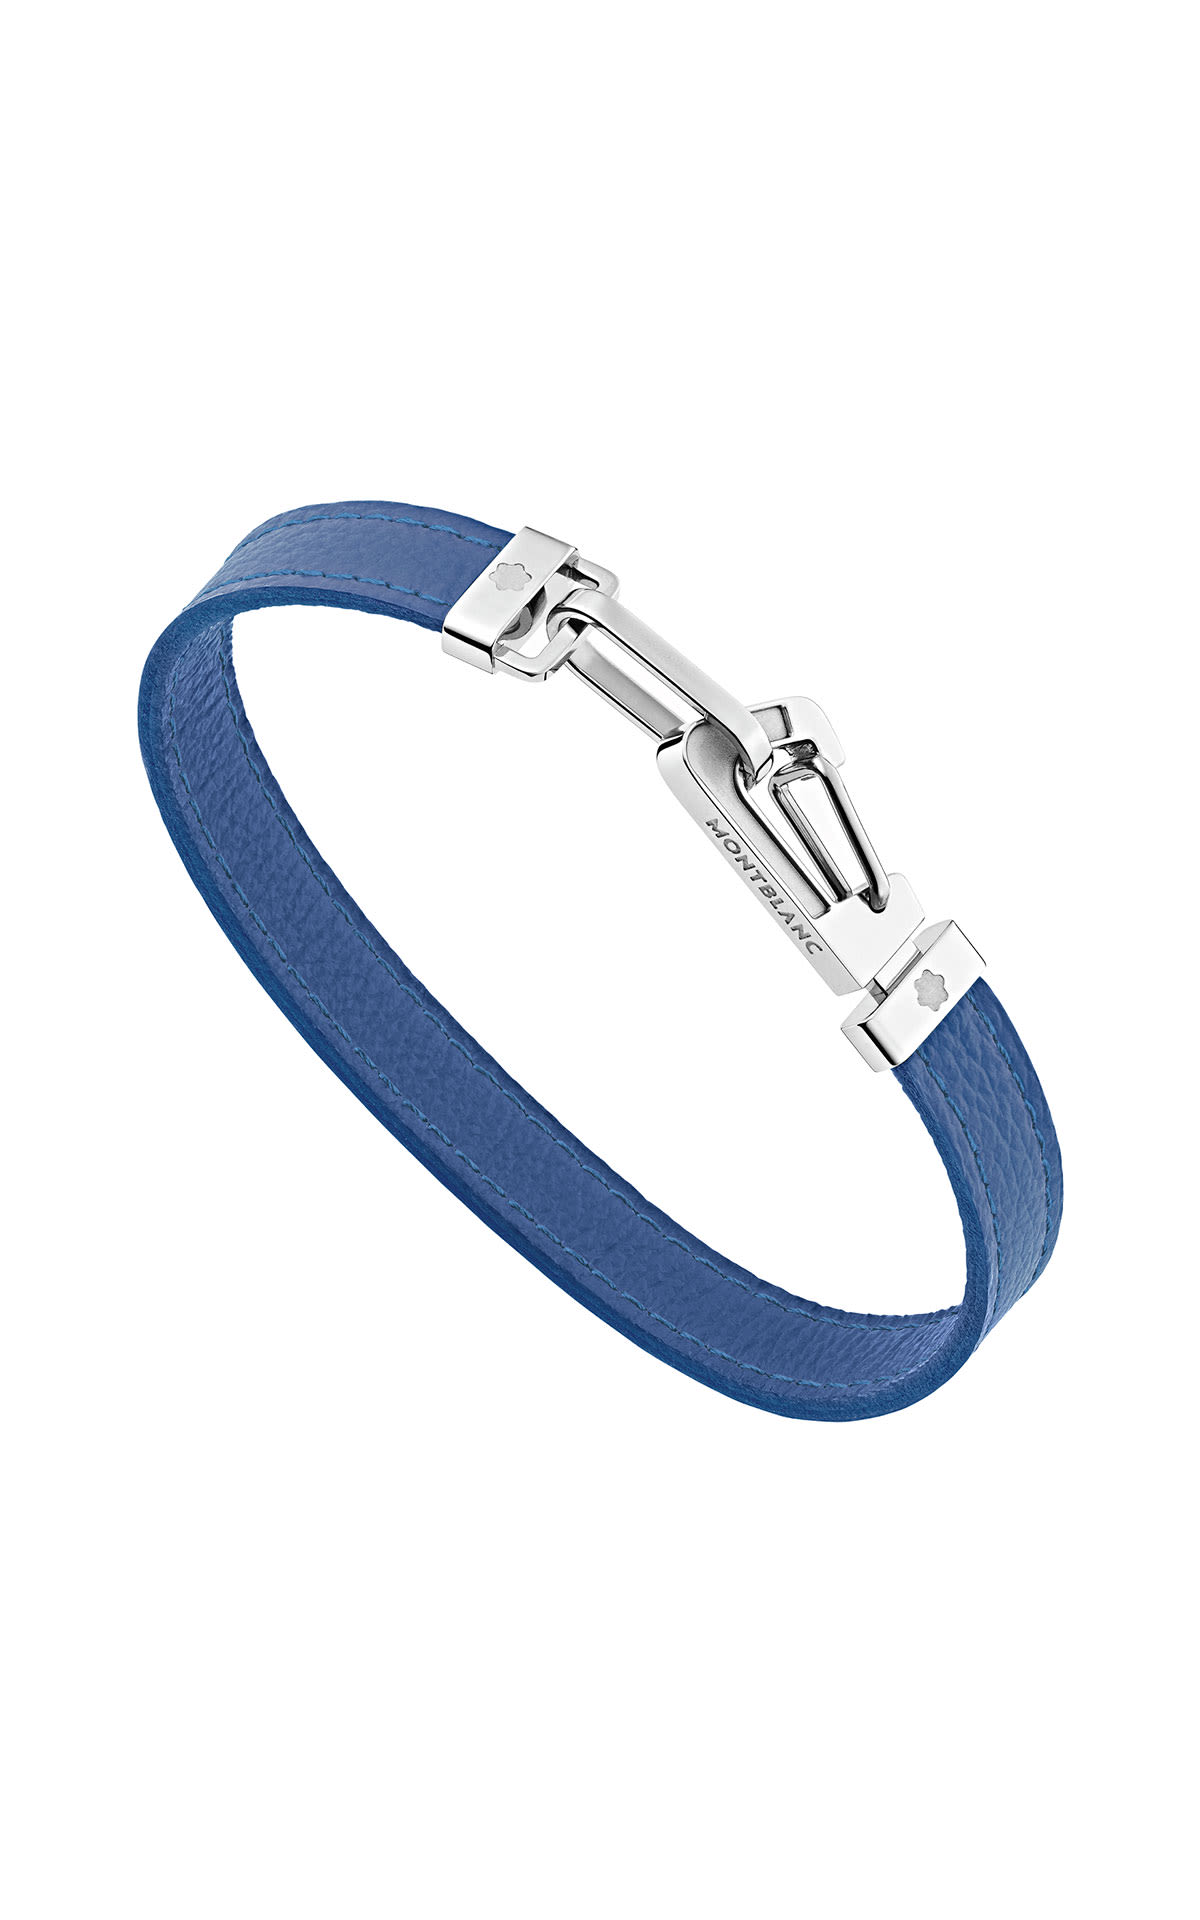 Blue leather bracelet with steel lobster clasp montblanc